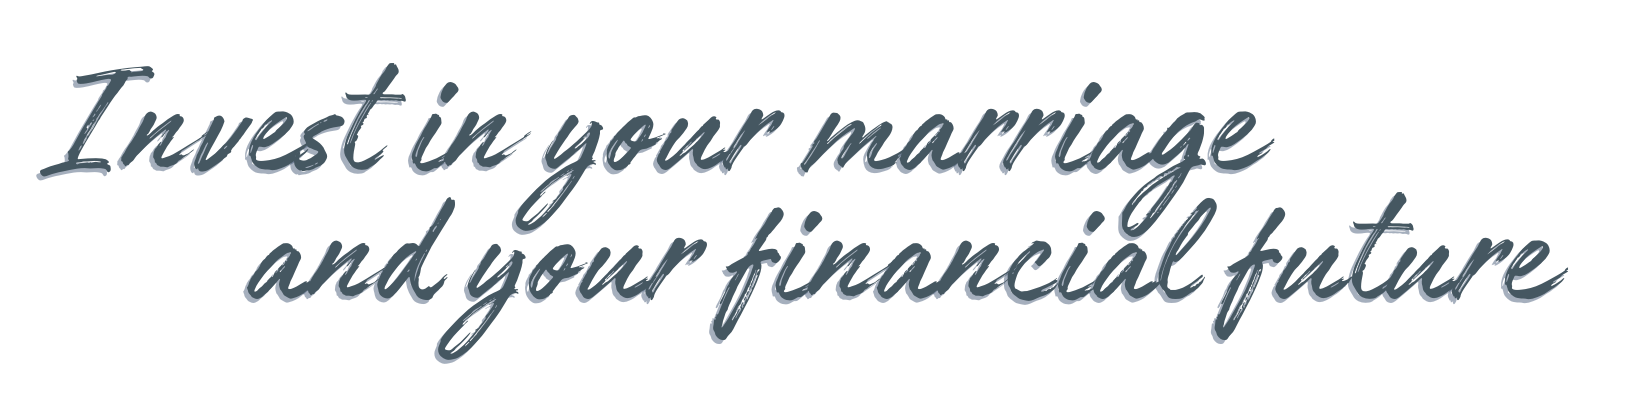 invest in your marriage and your financial future